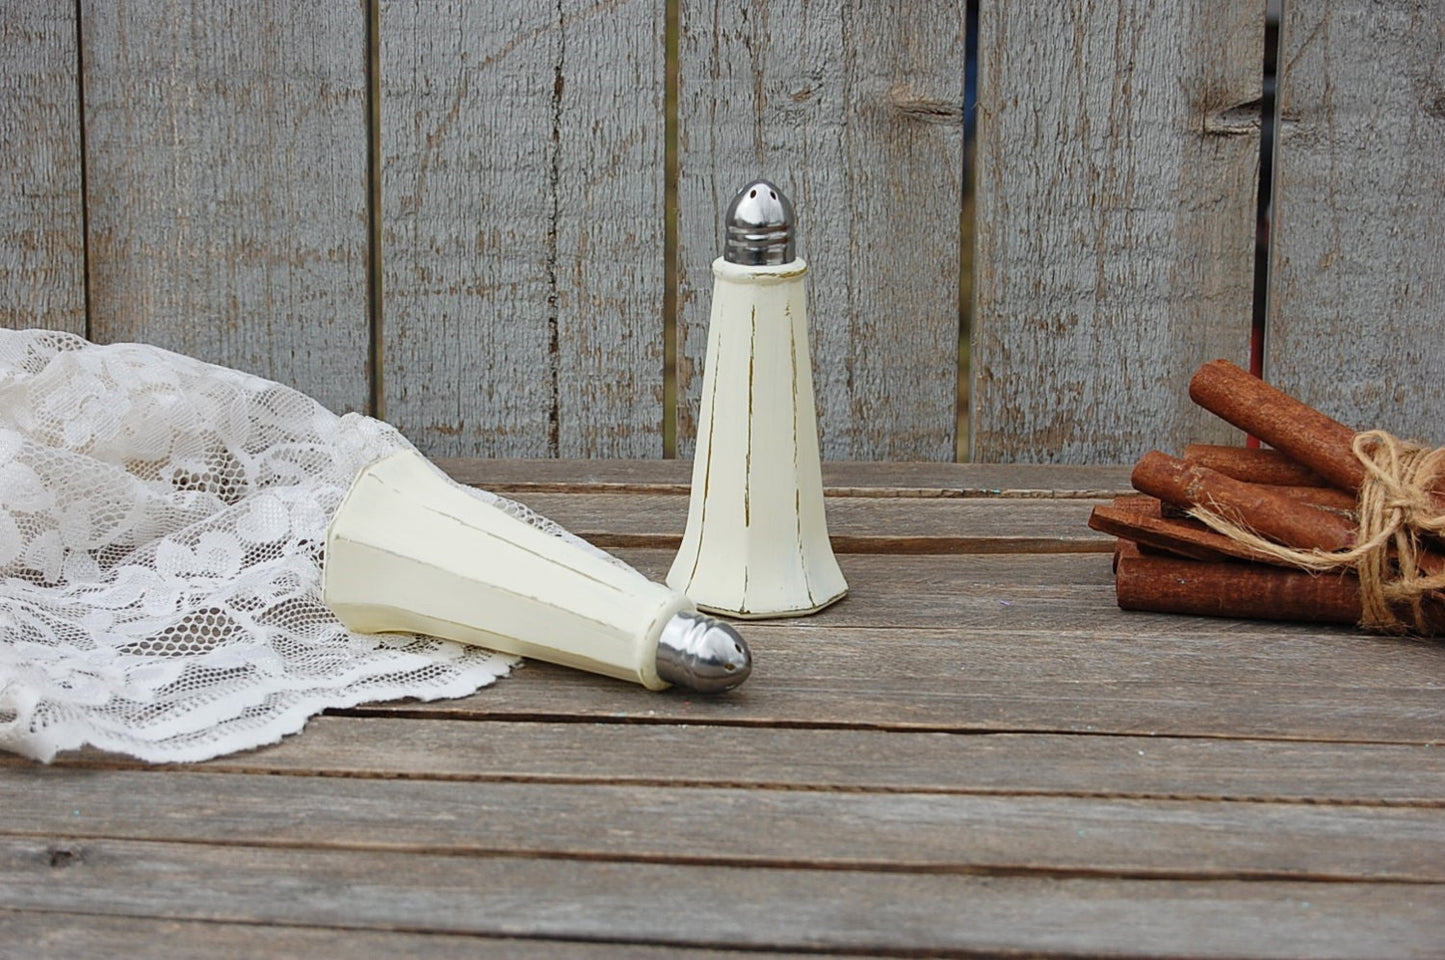 Ivory tower salt and pepper shakers - The Vintage Artistry